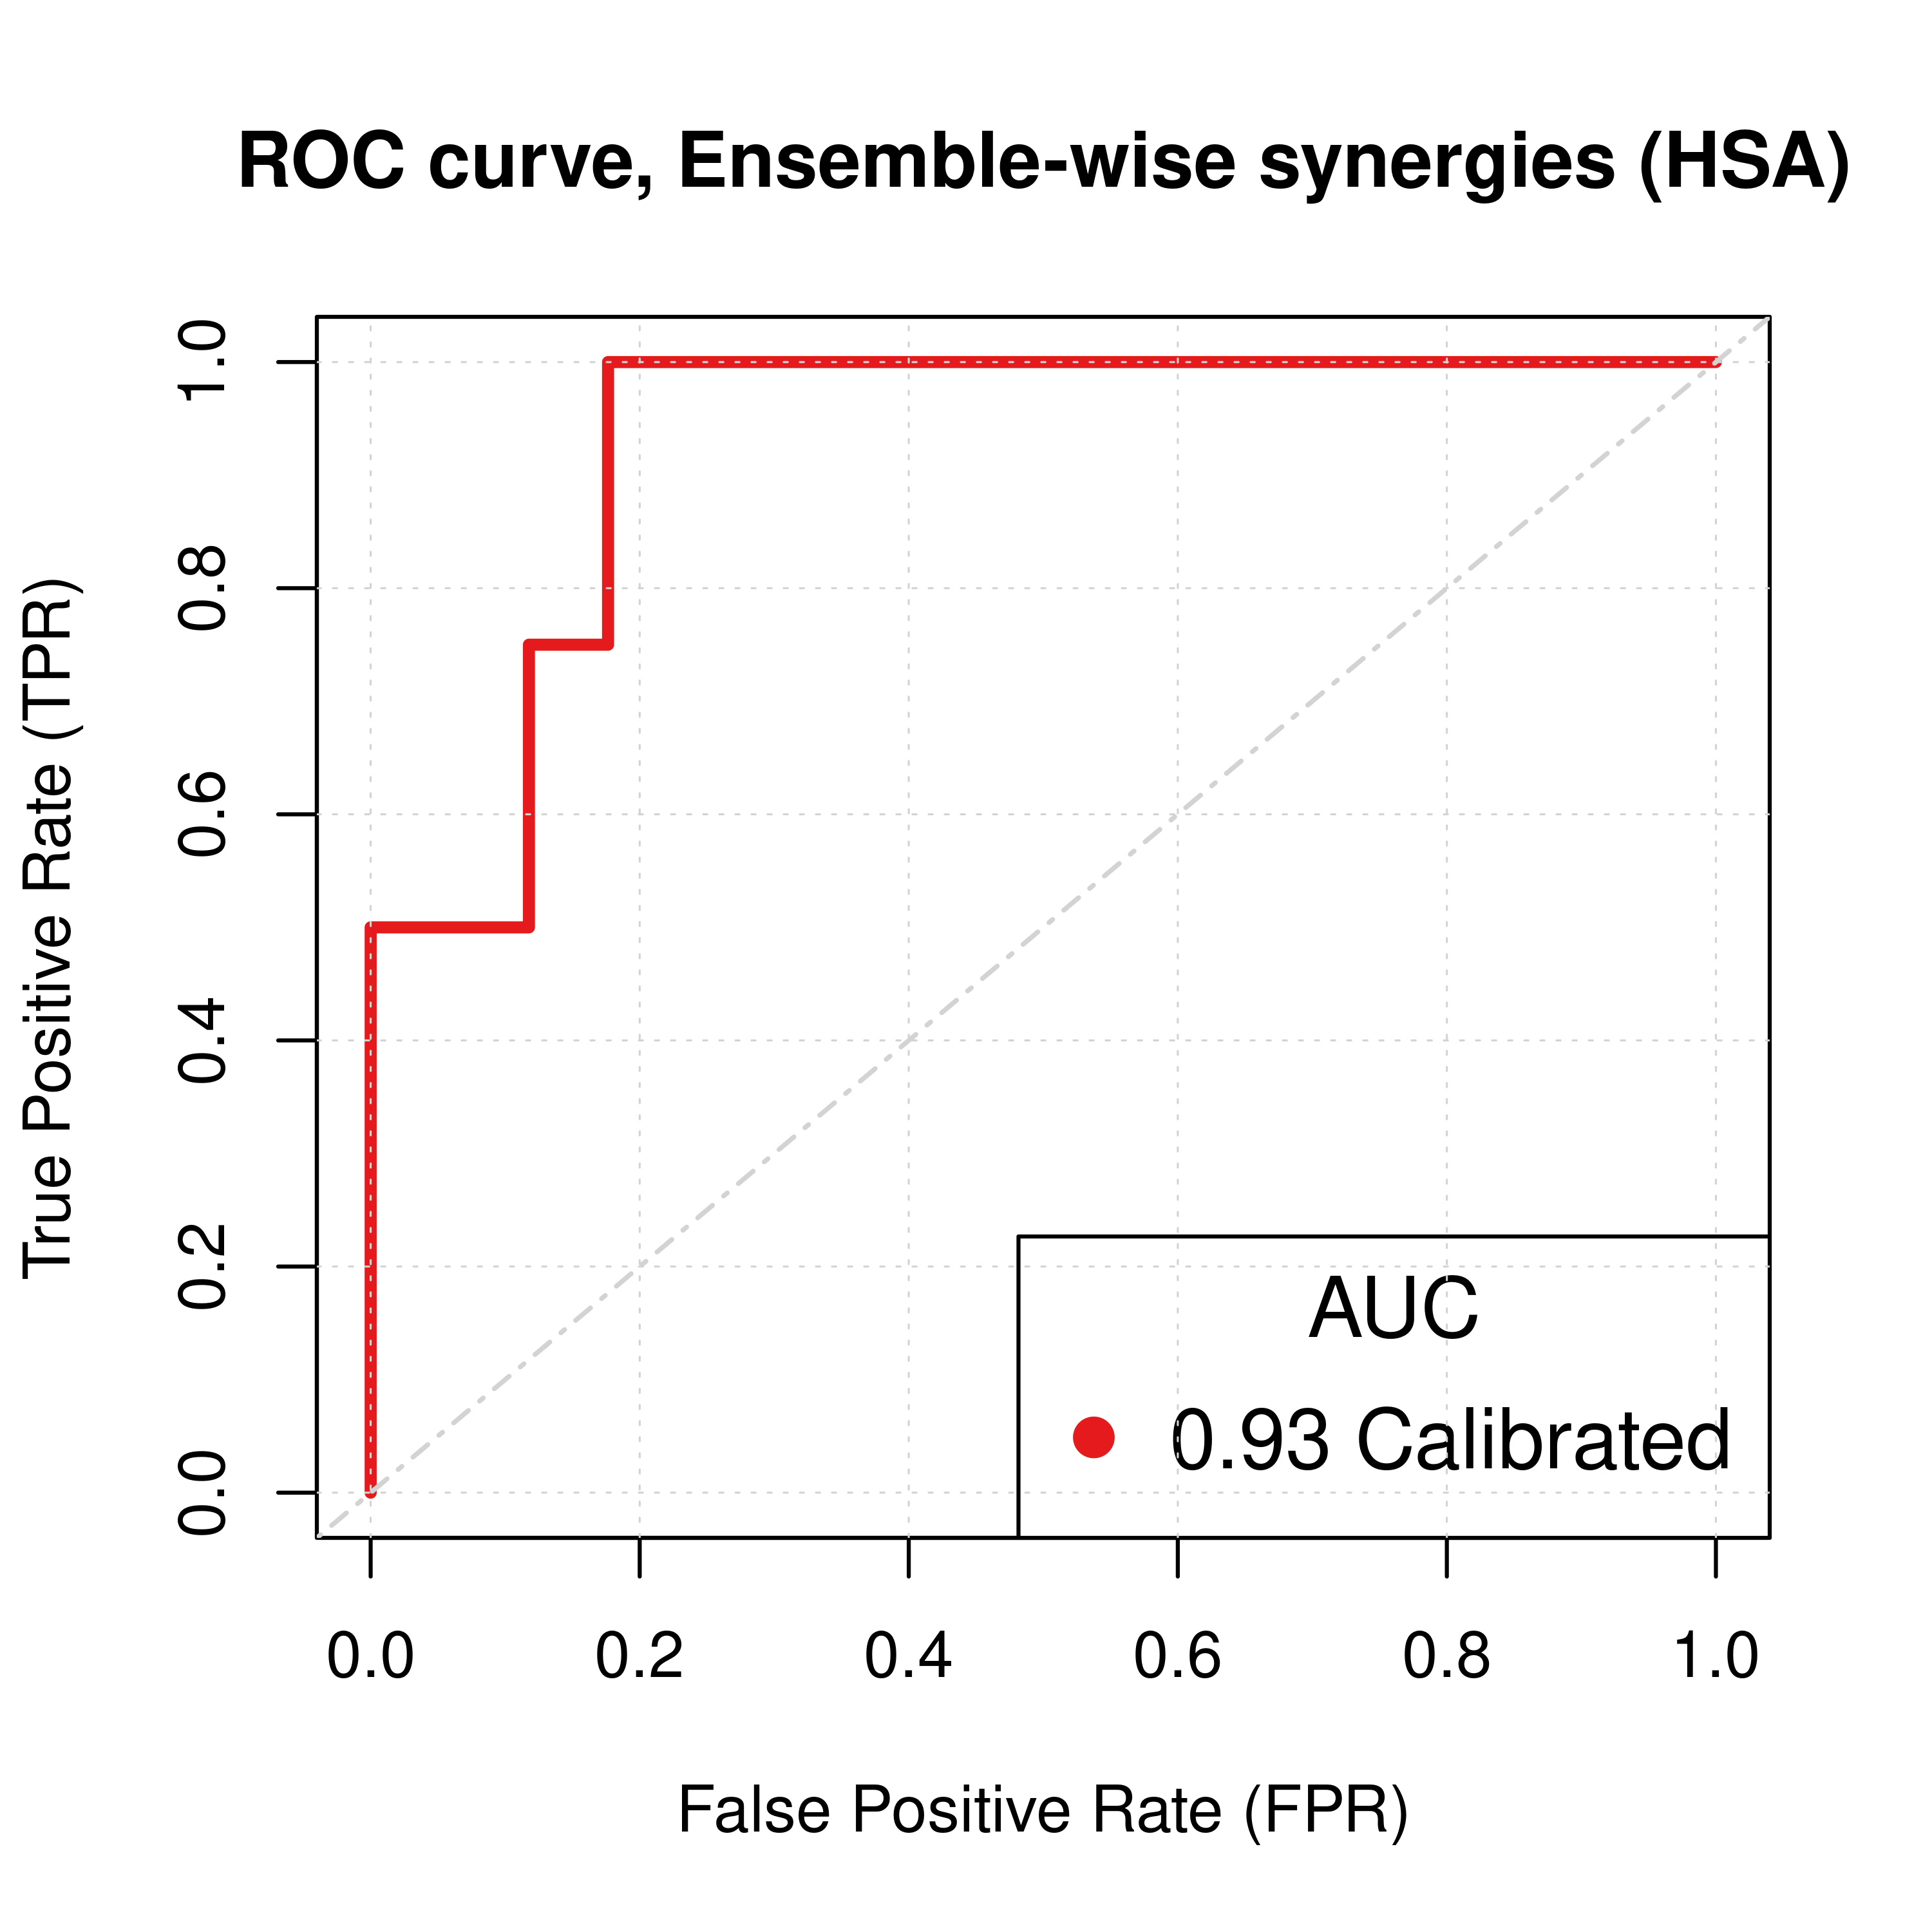 ROC curve (CASCADE 1.0, HSA synergy method, 150 models calibrated to the AGS steady state)